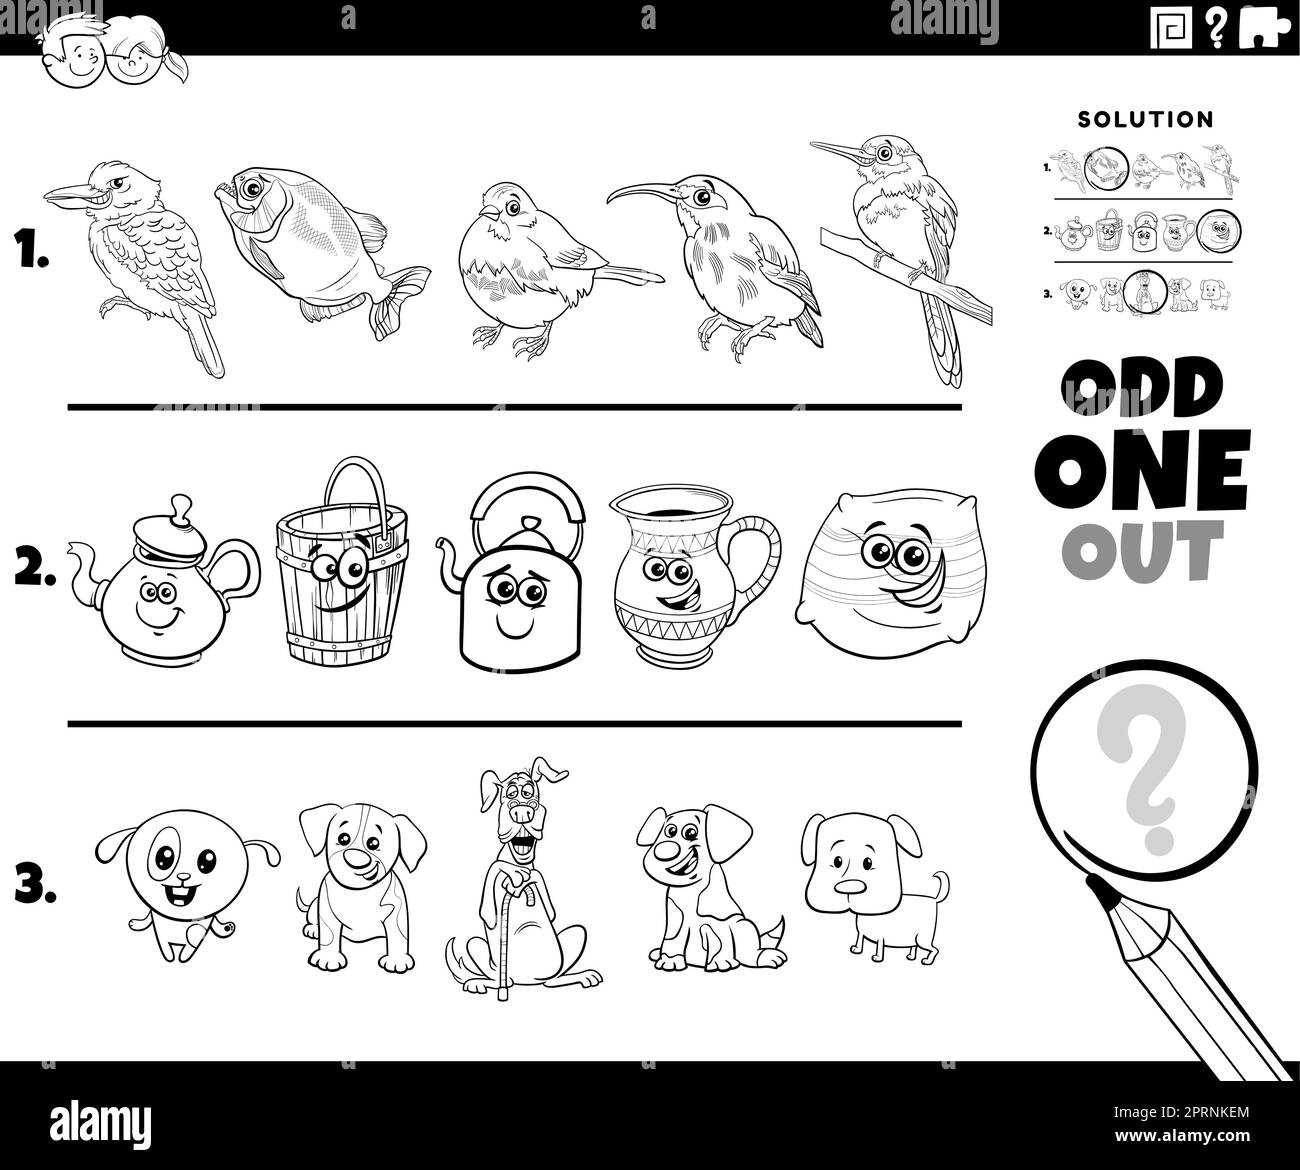 odd one out puzzle with cartoon characters coloring page Stock Vector